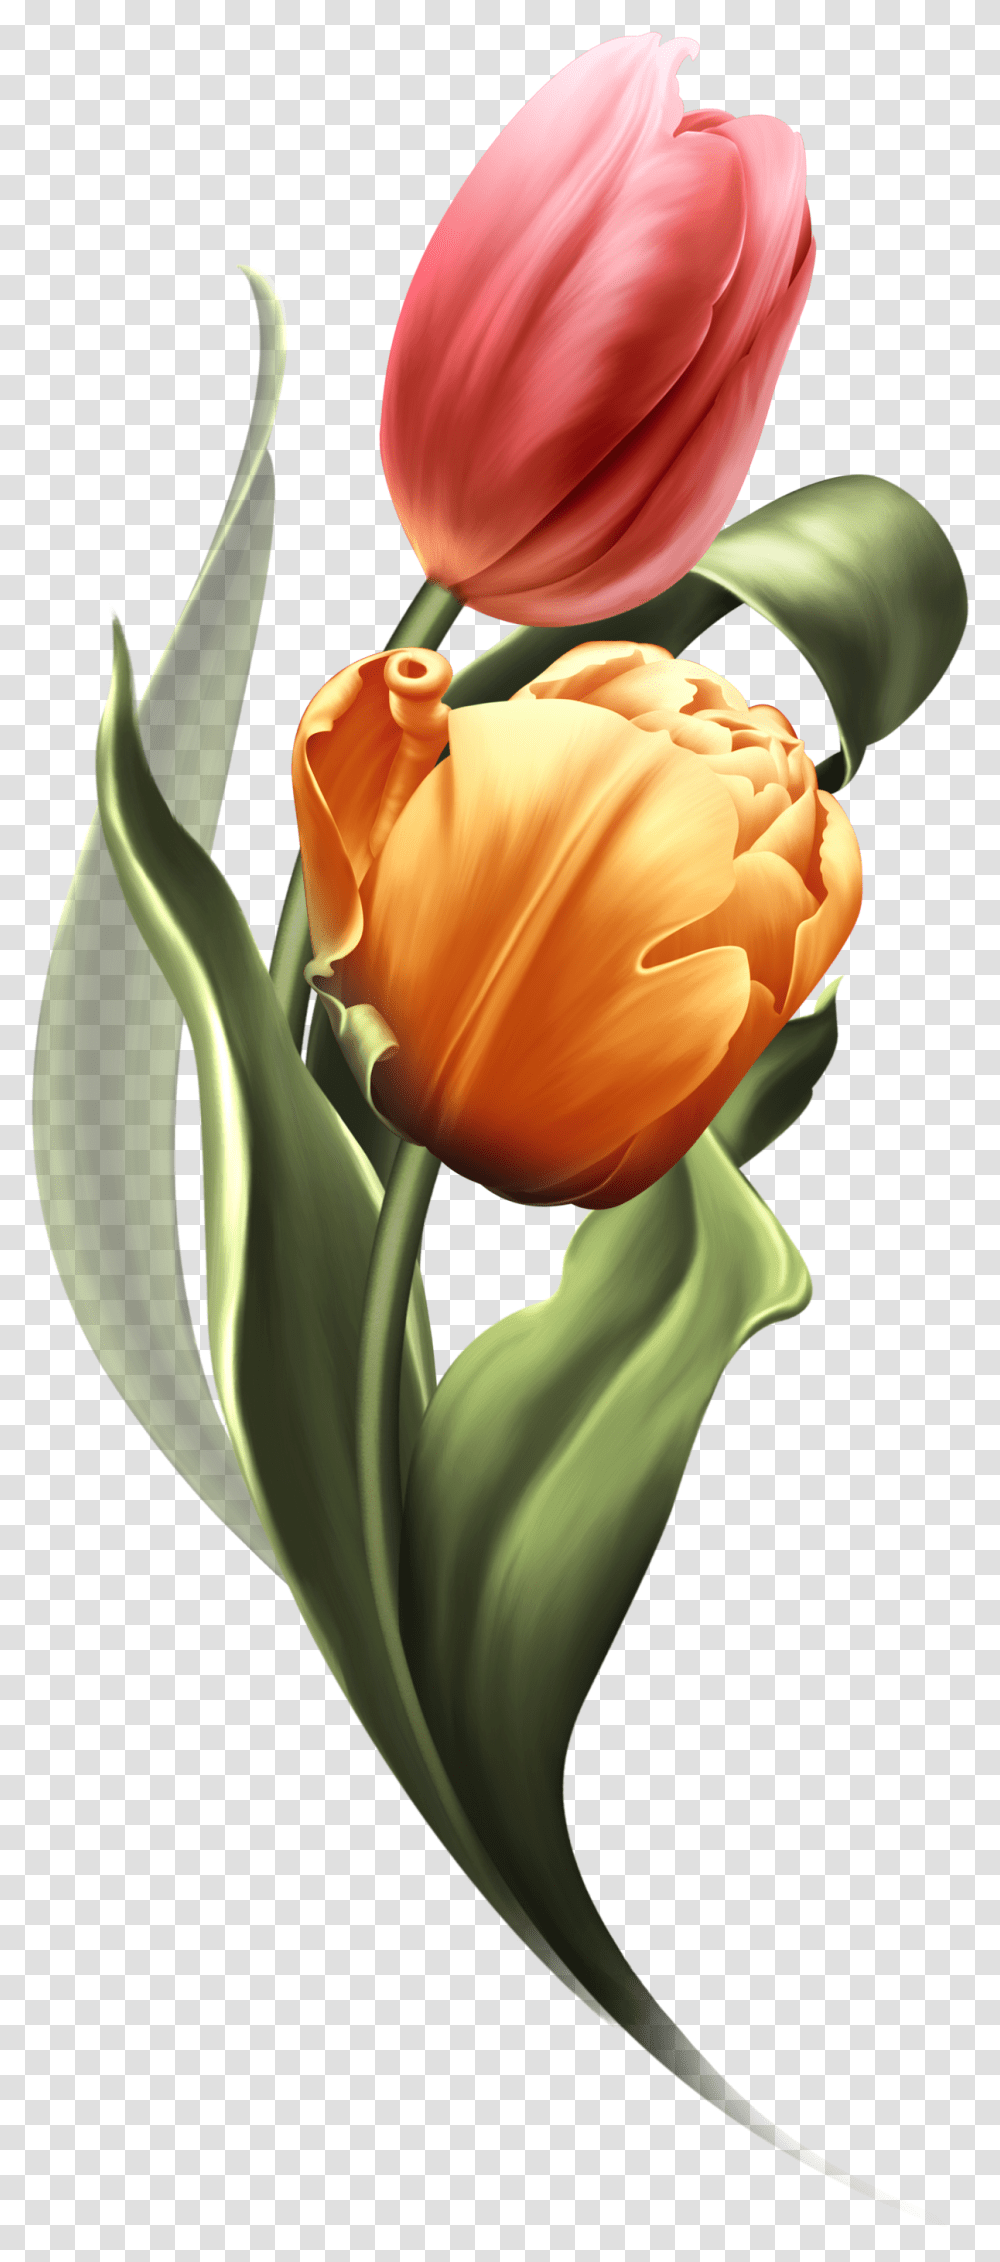 Bring Me Tulips Bring It On Tulips Tulips Flowers, Plant, Blossom, Petal Transparent Png